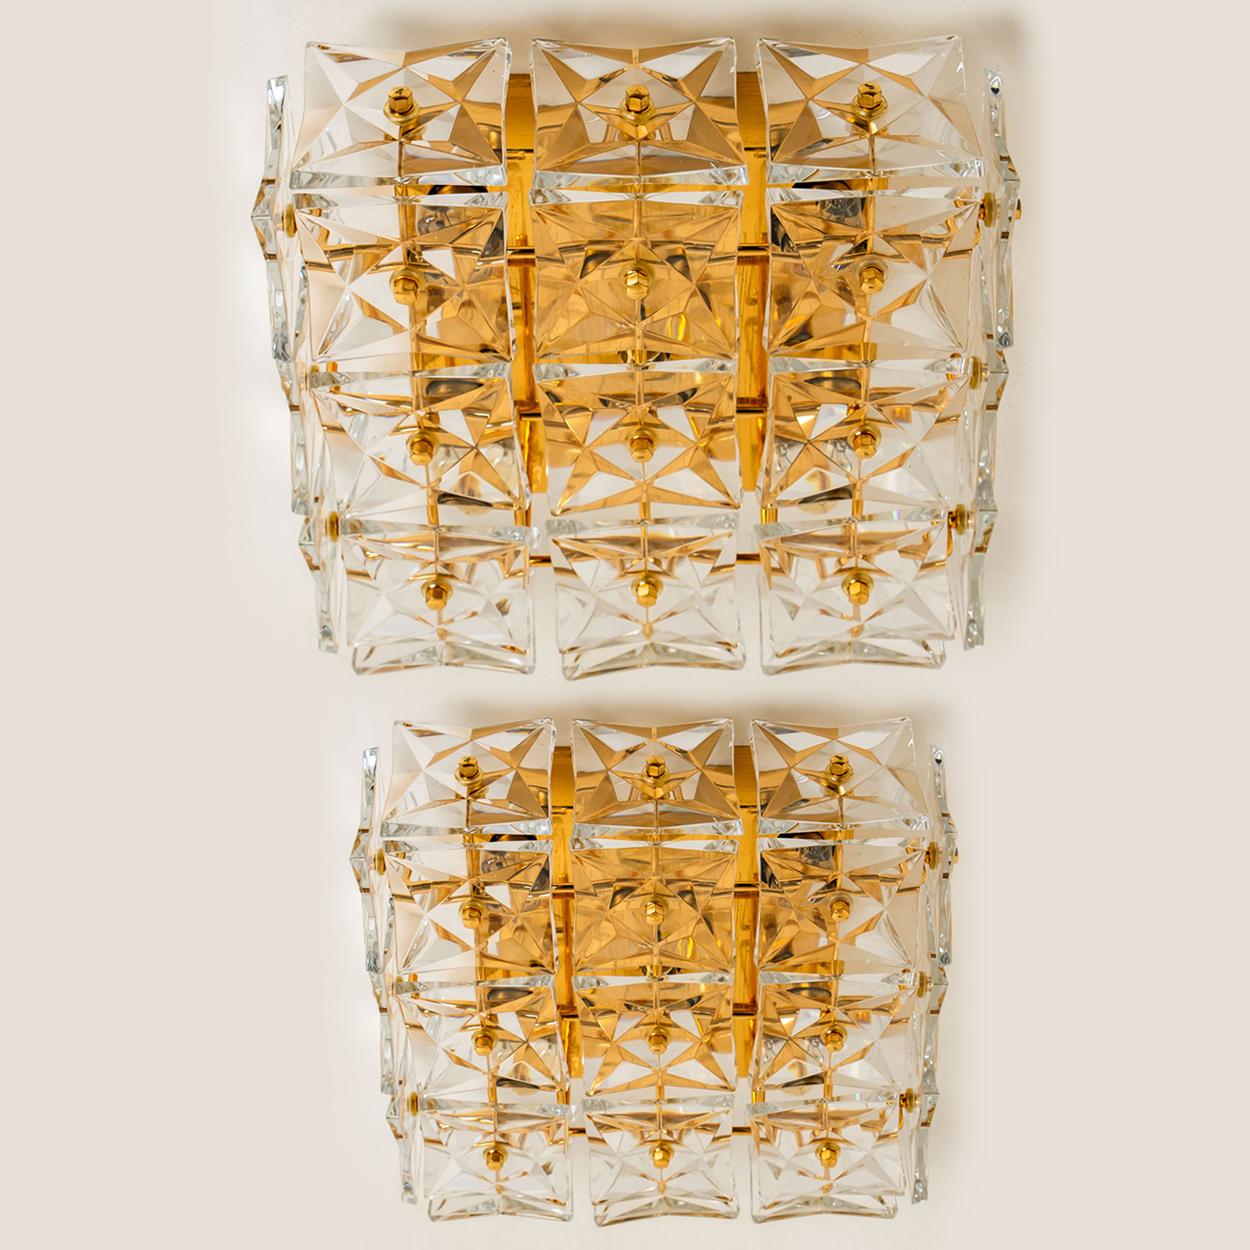 This modernist design flushmount was designed by the Kinkeldey design team during the 1970s, and manufactured in Germany. A handmade and high quality piece.

The crystals are meticulously cut in such a way that they radiate the light of the bulbs